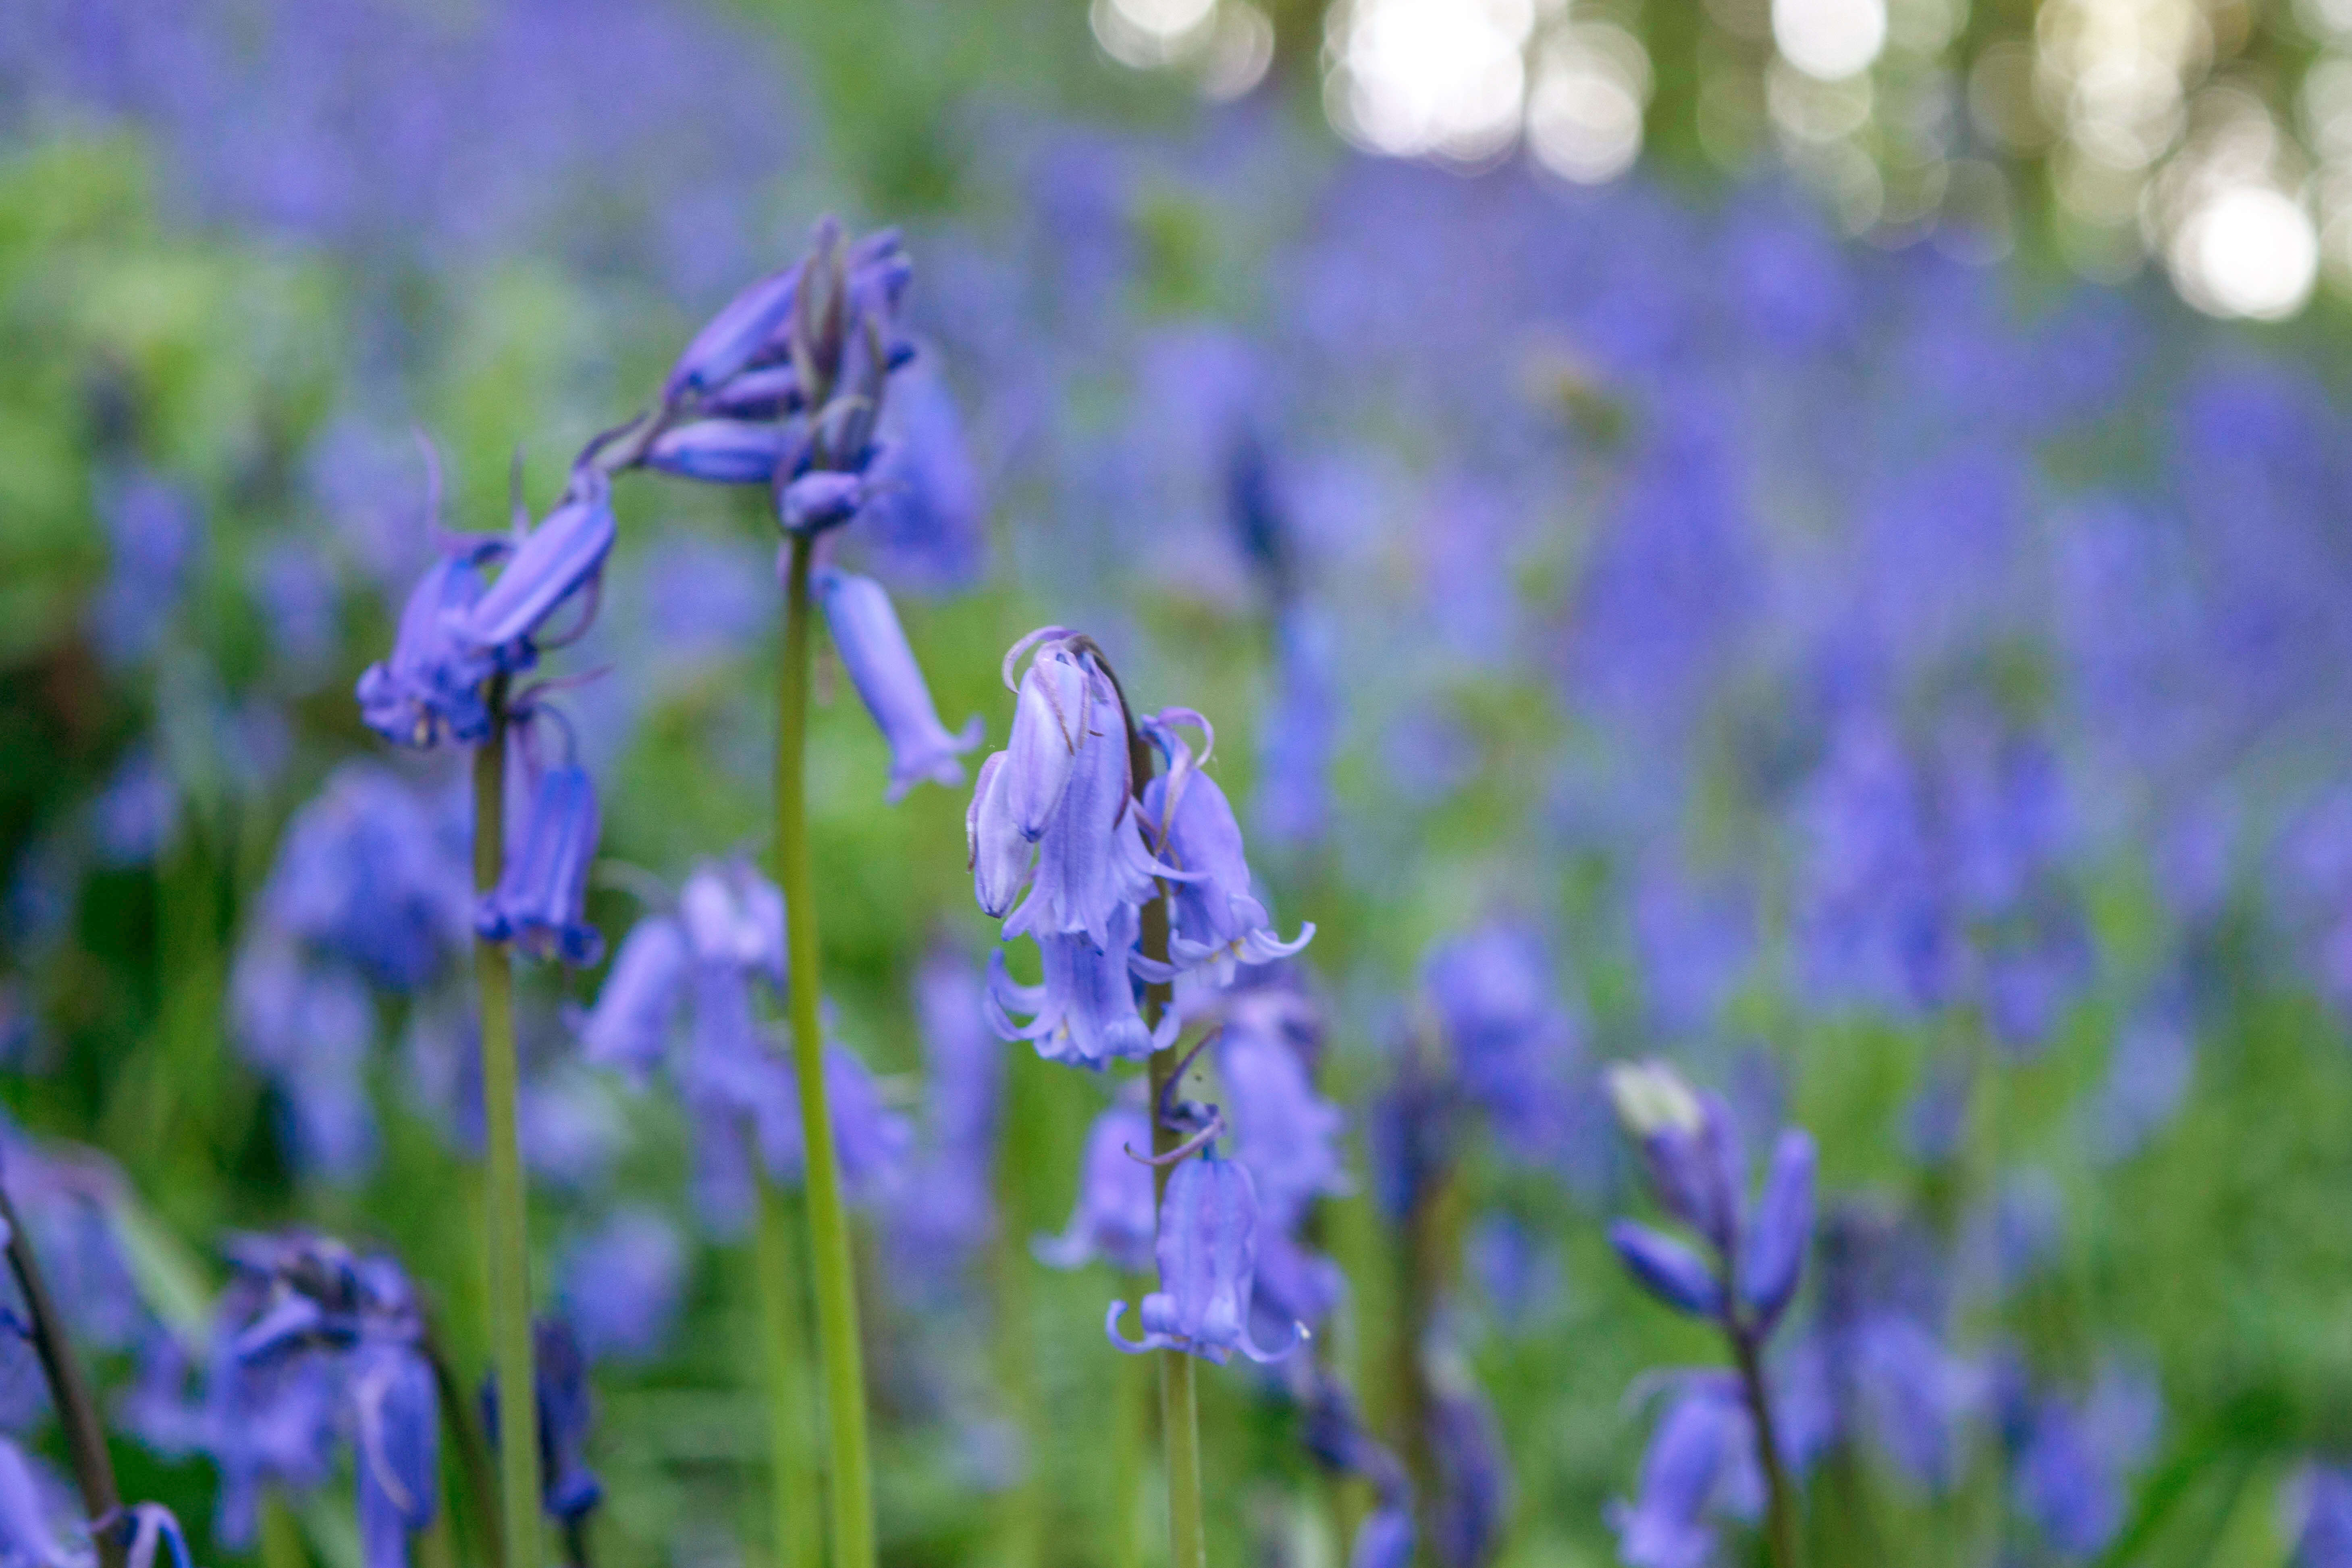 Image of Common Bluebell